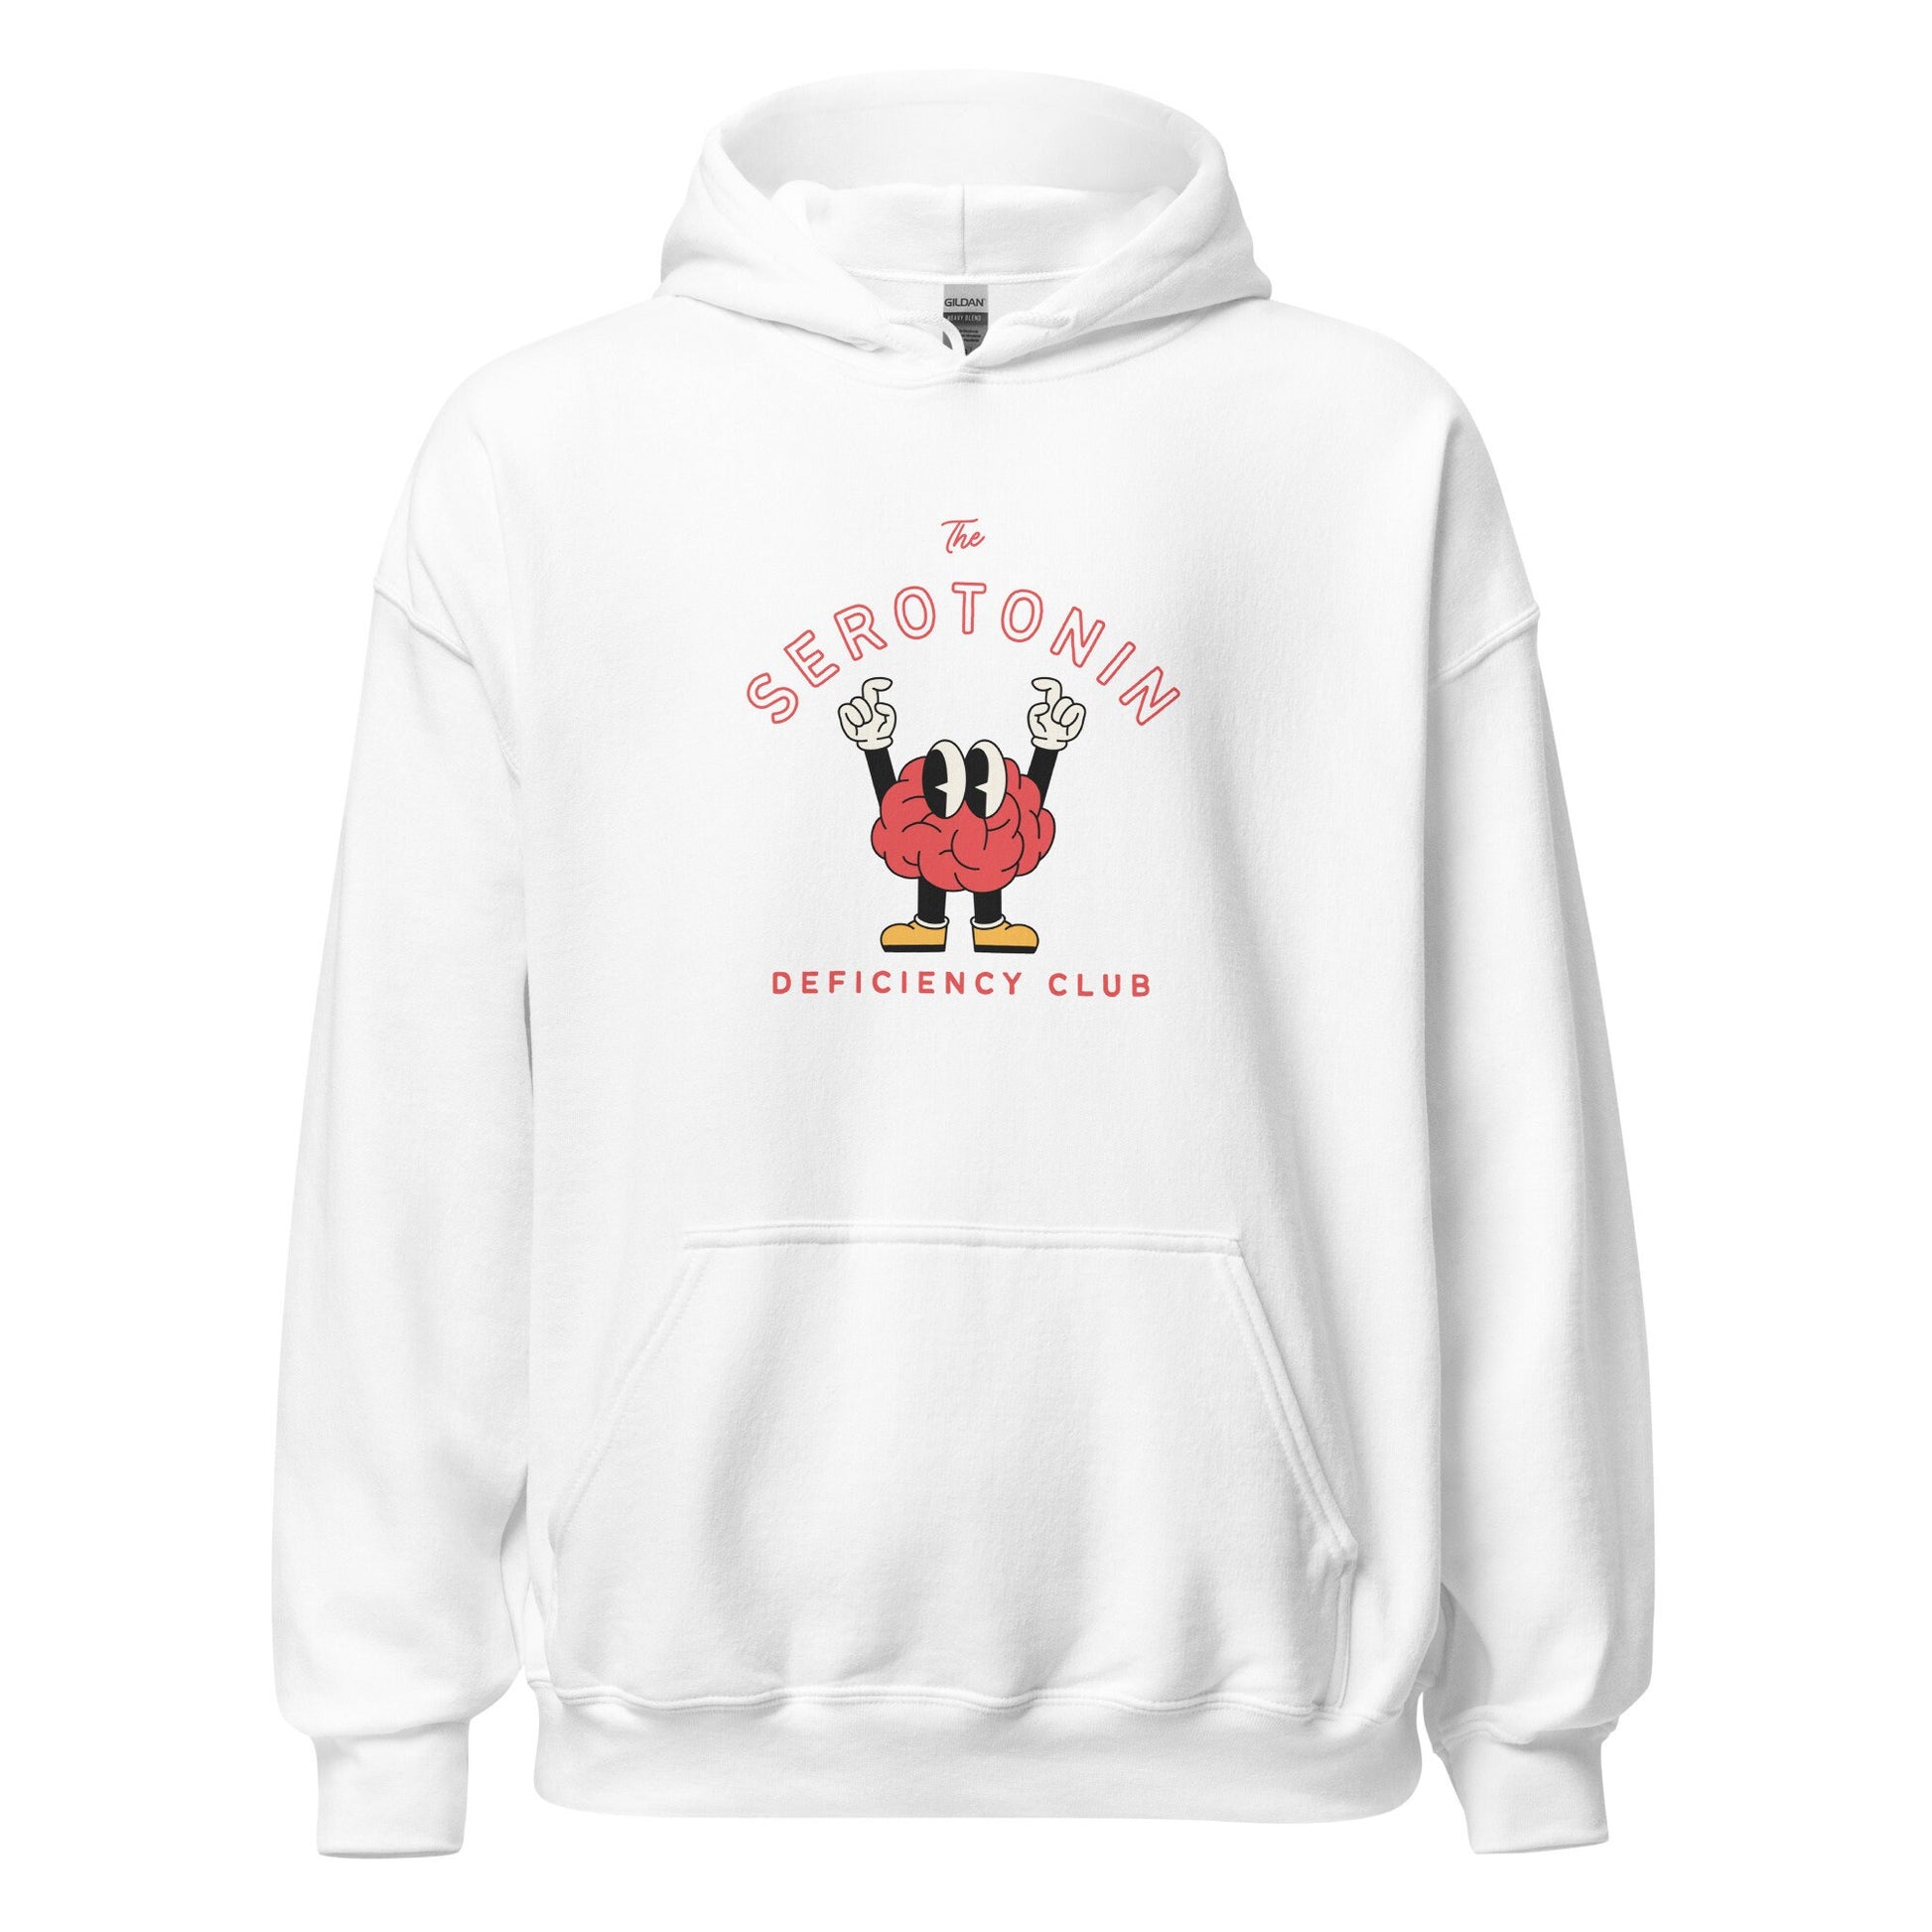 Mental Health Hoodie &#39;Serotonin Deficiency Club&#39;, part of profit donated to Depression Charity, Mental Health, Unisex Hoodie, Self Care